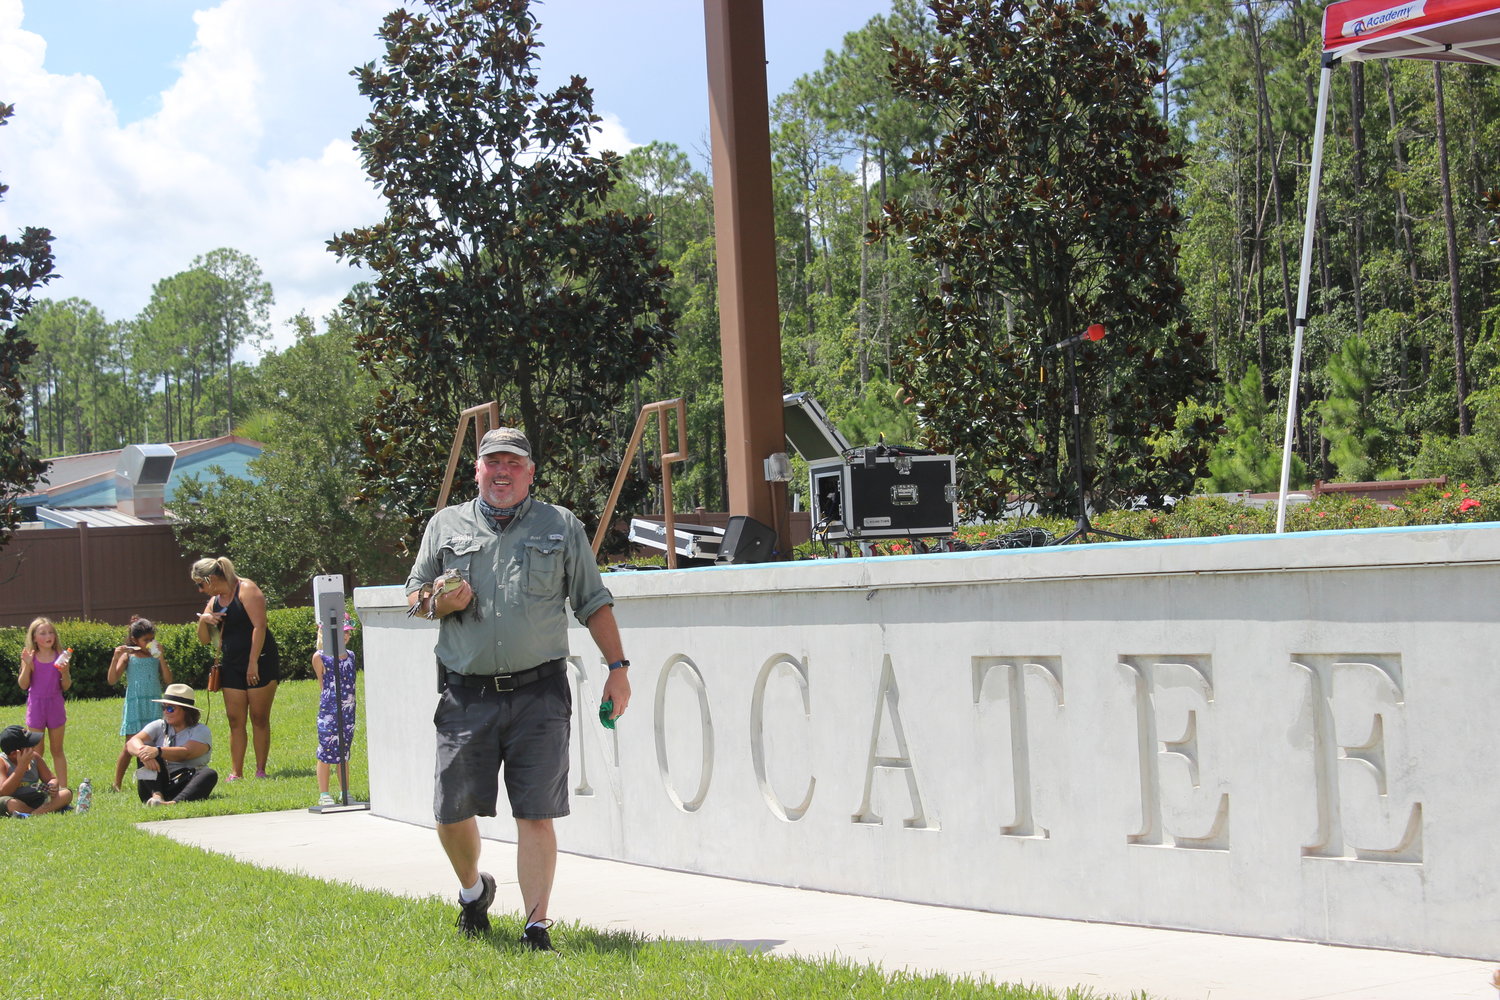 Gatorland alligator trainers will be on hand for the Nocatee Farmers Market on Aug. 21.